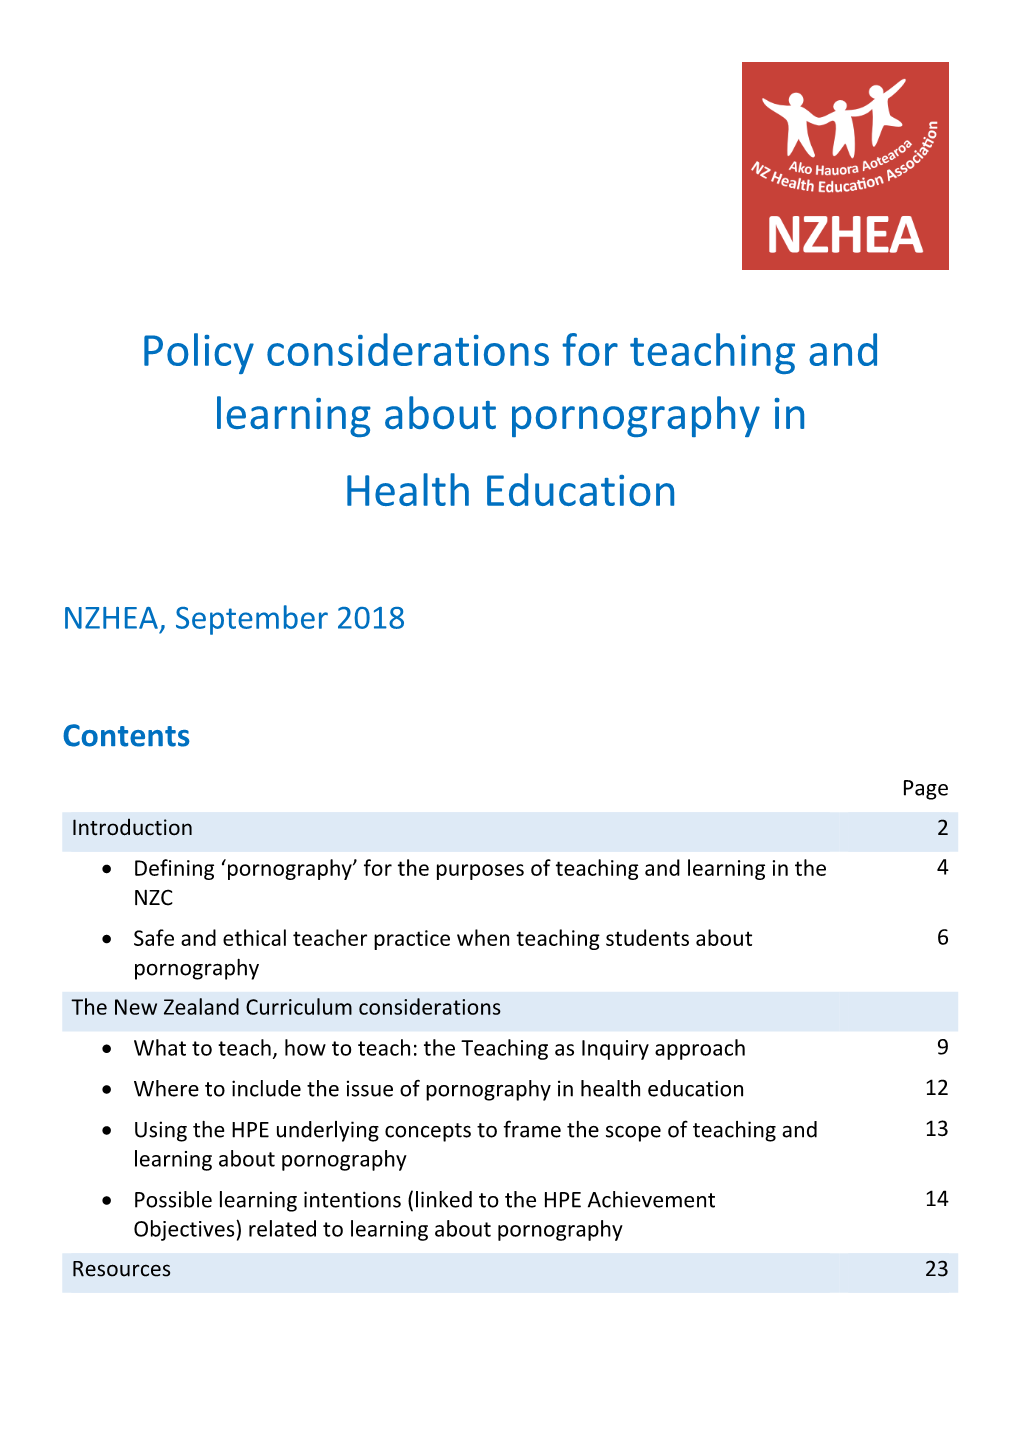 Policy Considerations for Teaching and Learning About Pornography in Health Education